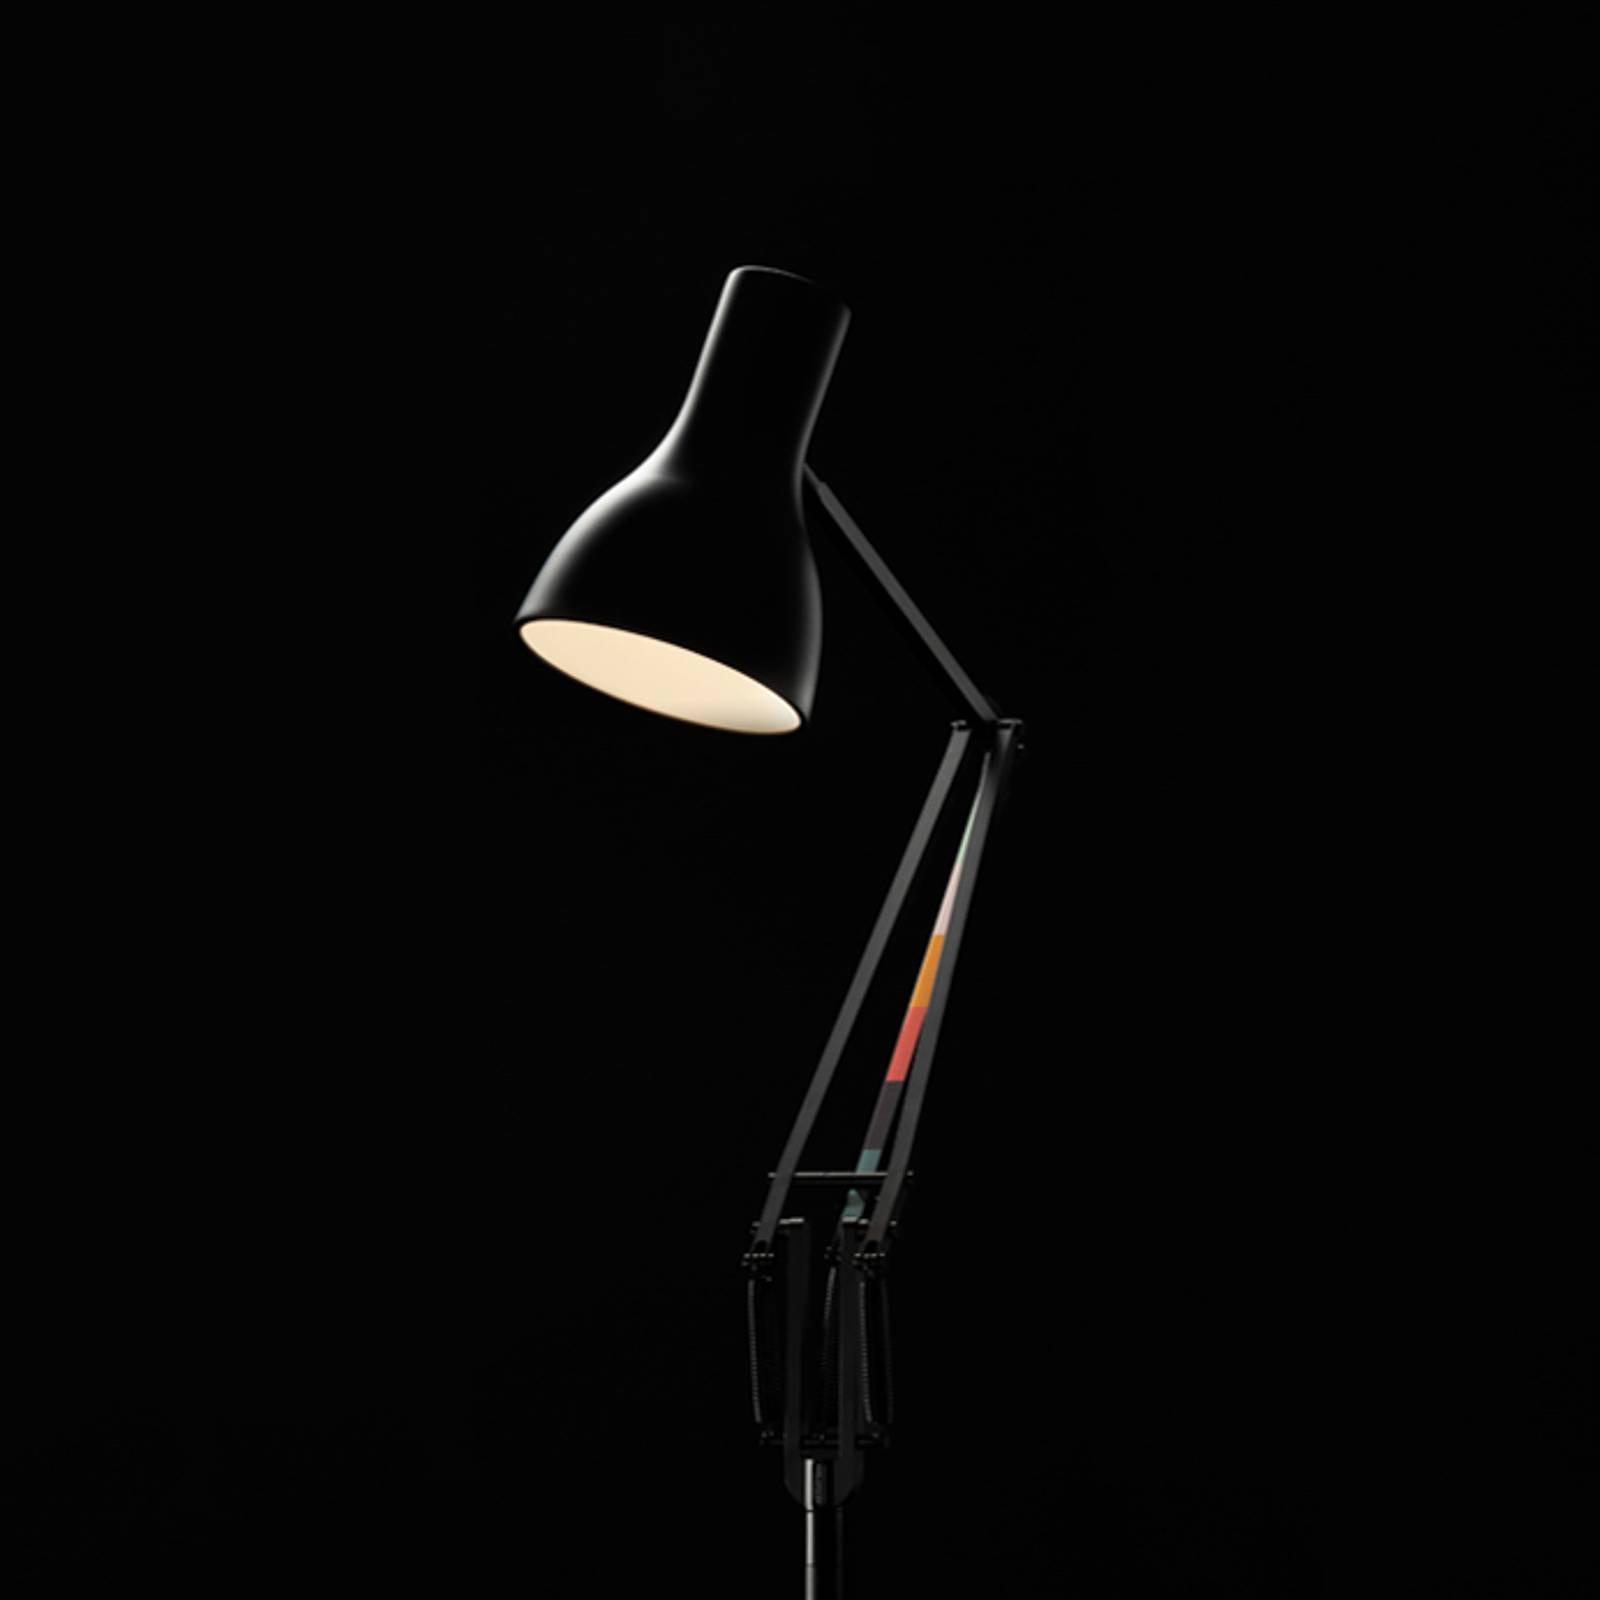 Anglepoise Type 75 Stehlampe Paul Smith Edition 5 von Anglepoise